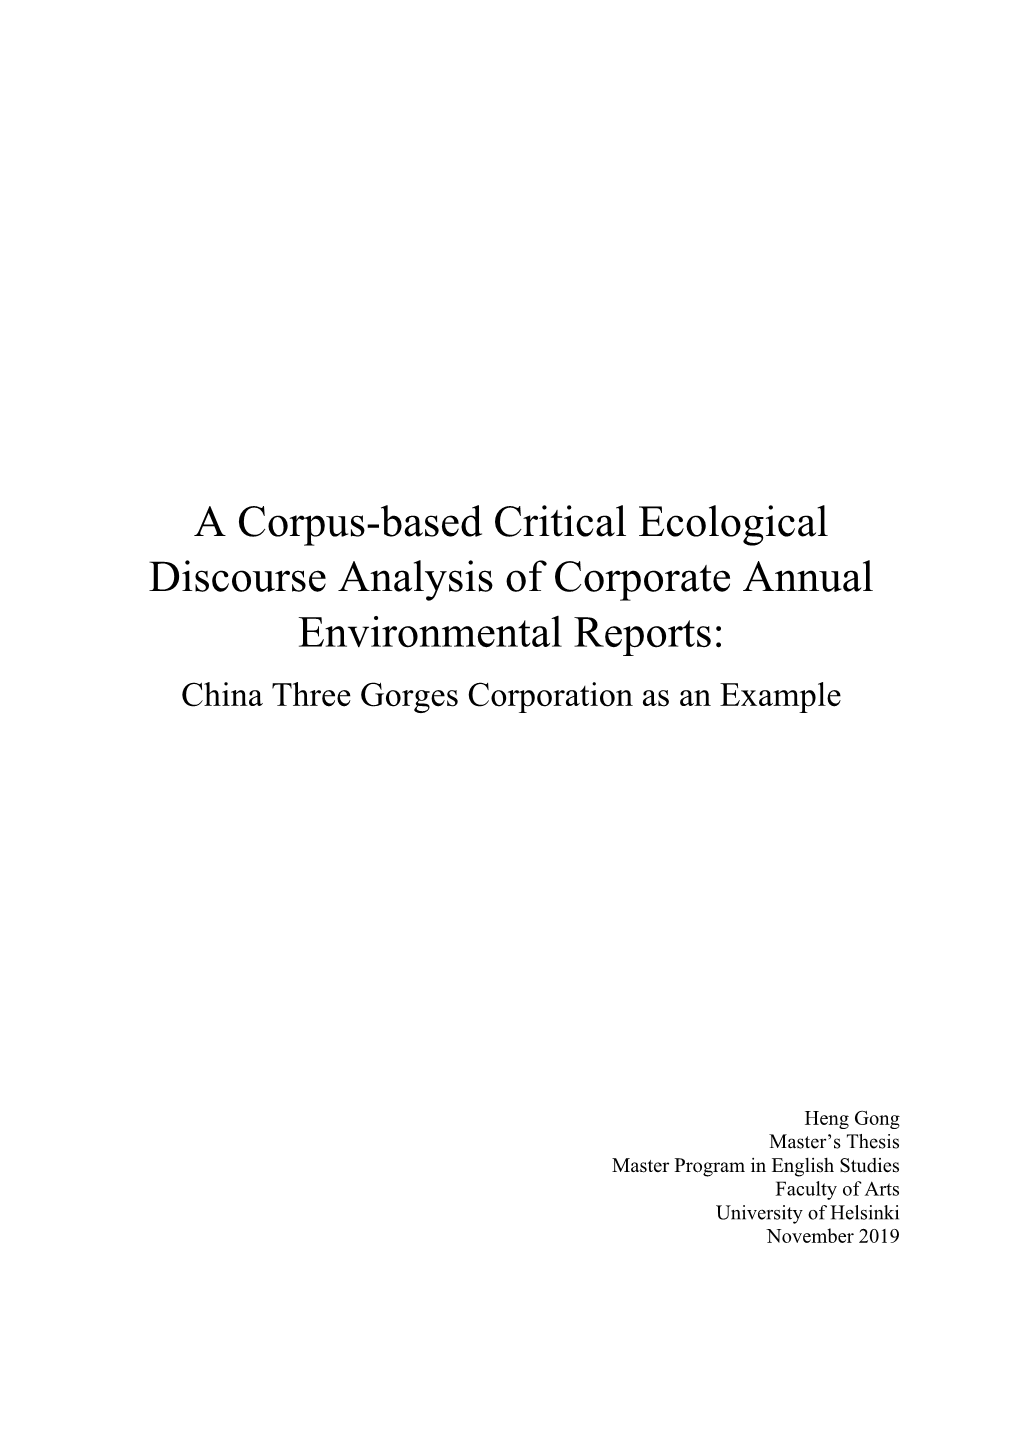 A Corpus-Based Critical Ecological Discourse Analysis of Corporate Annual Environmental Reports: China Three Gorges Corporation As an Example